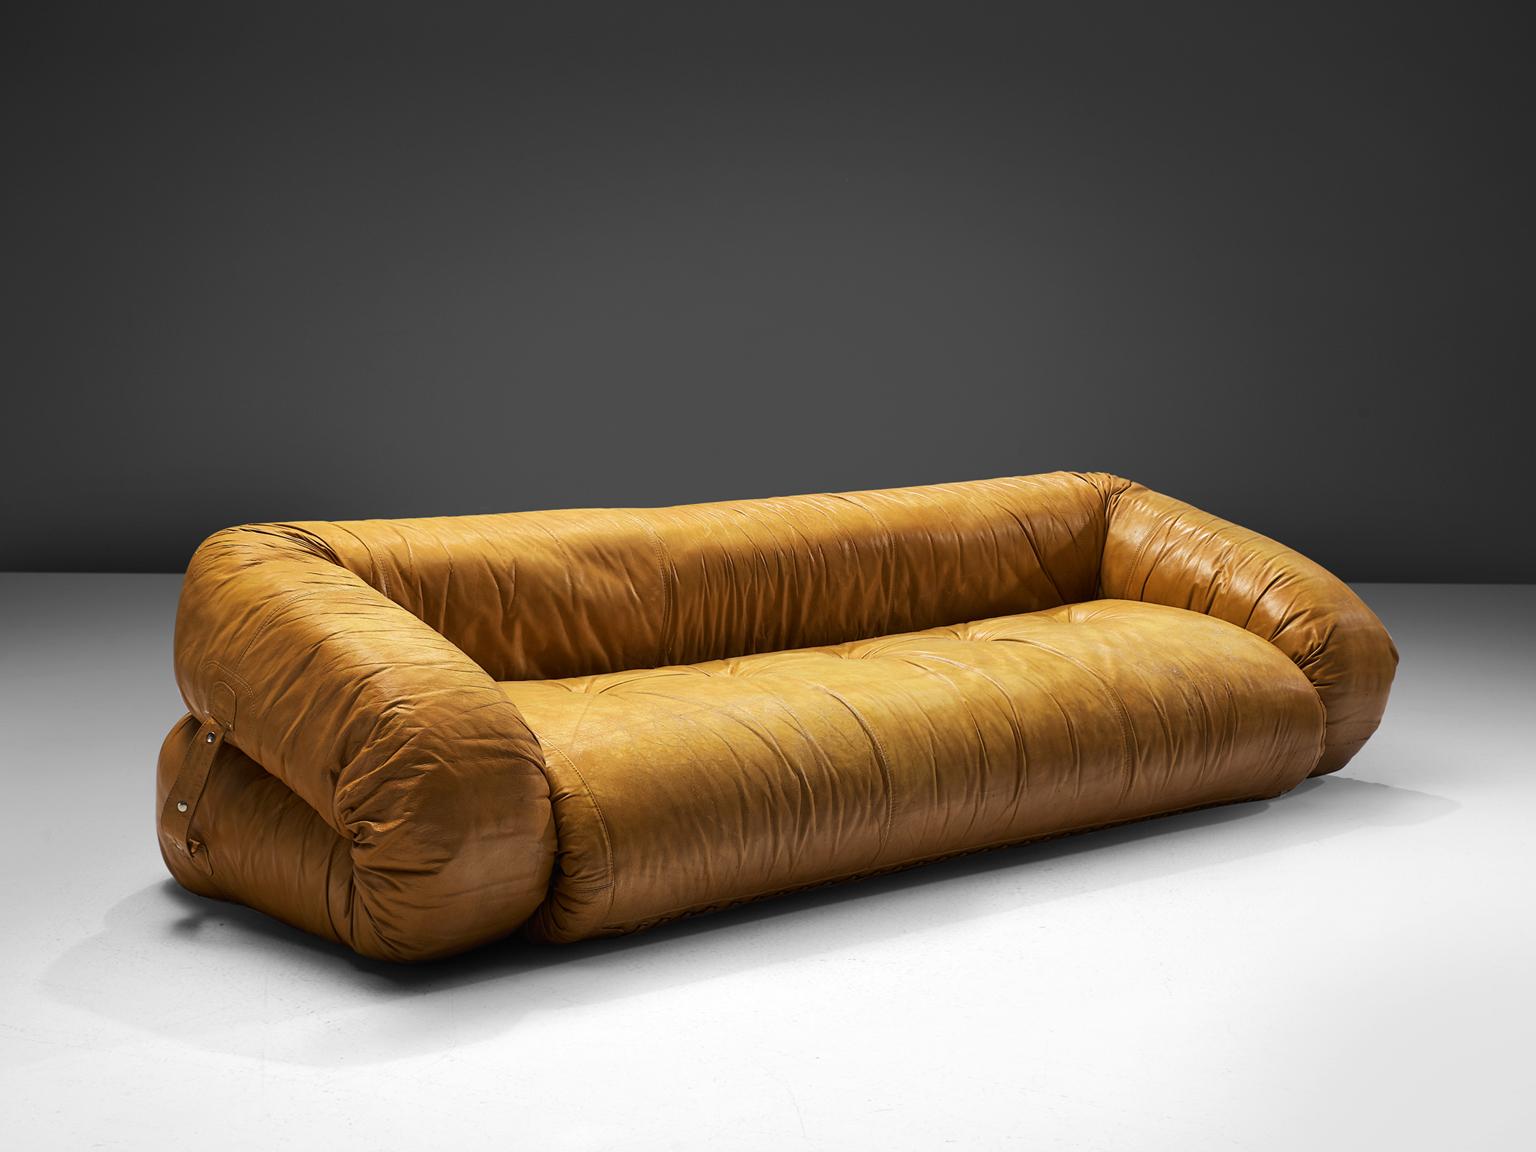 Alessandro Becchi for Giovannetti, Anfibio leather sofa bed, Italy, 1970s.

This Anfibio (translation: amphibian) sofa was designed by Alessandro Becchi (1946-) for Giovannetti in the 1970s. This convertible Italian sofa is upholstered with its